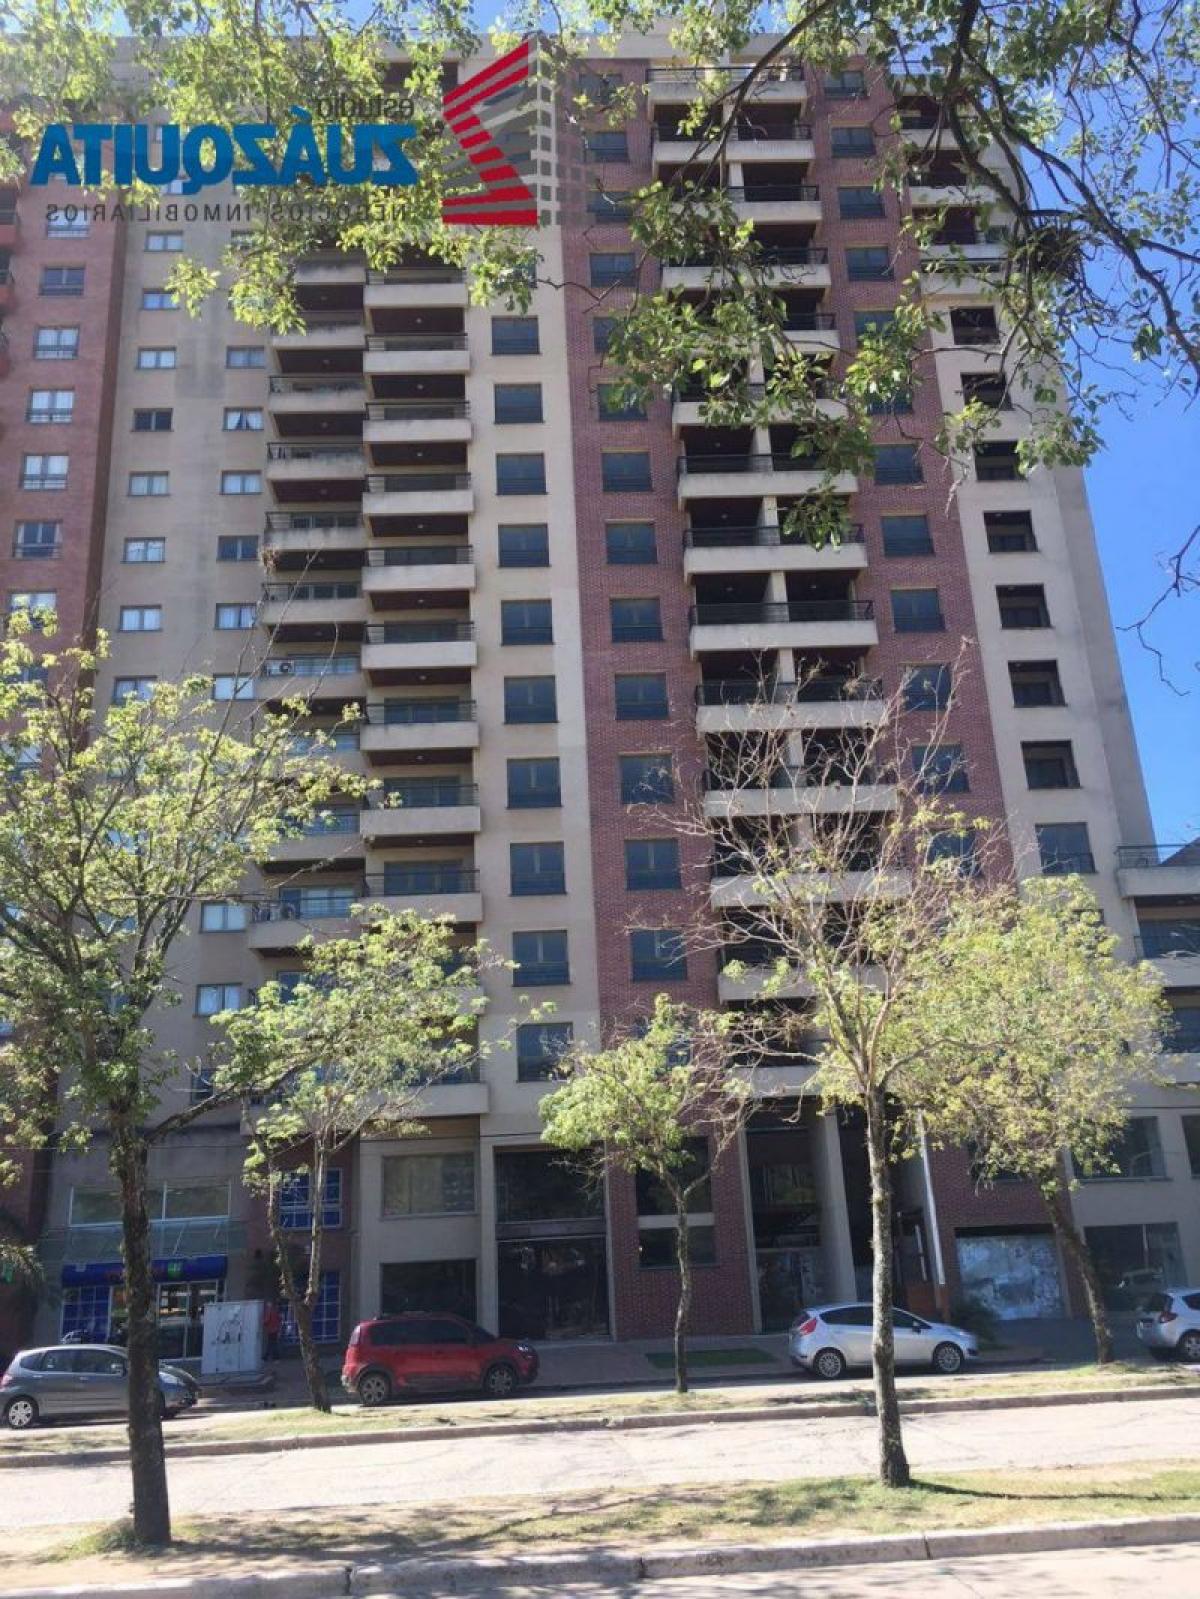 Picture of Apartment For Sale in Chaco, Chaco, Argentina